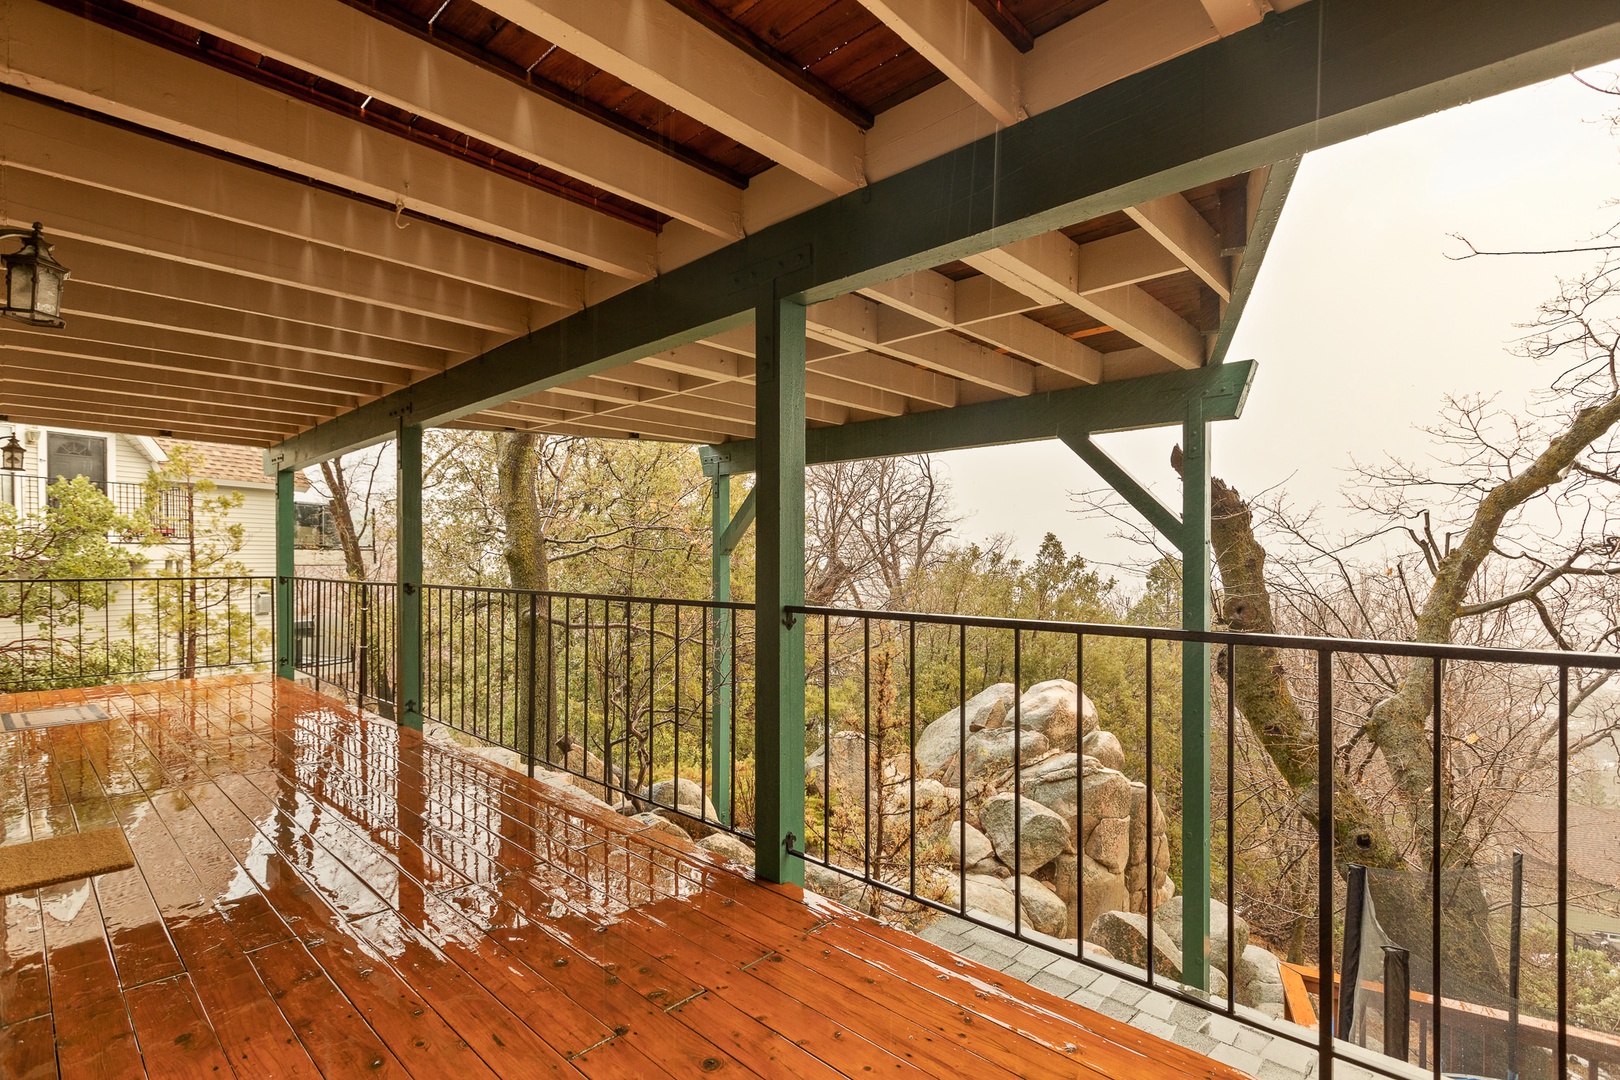 Covered deck off the Family Room offering views of stunning natural scenery